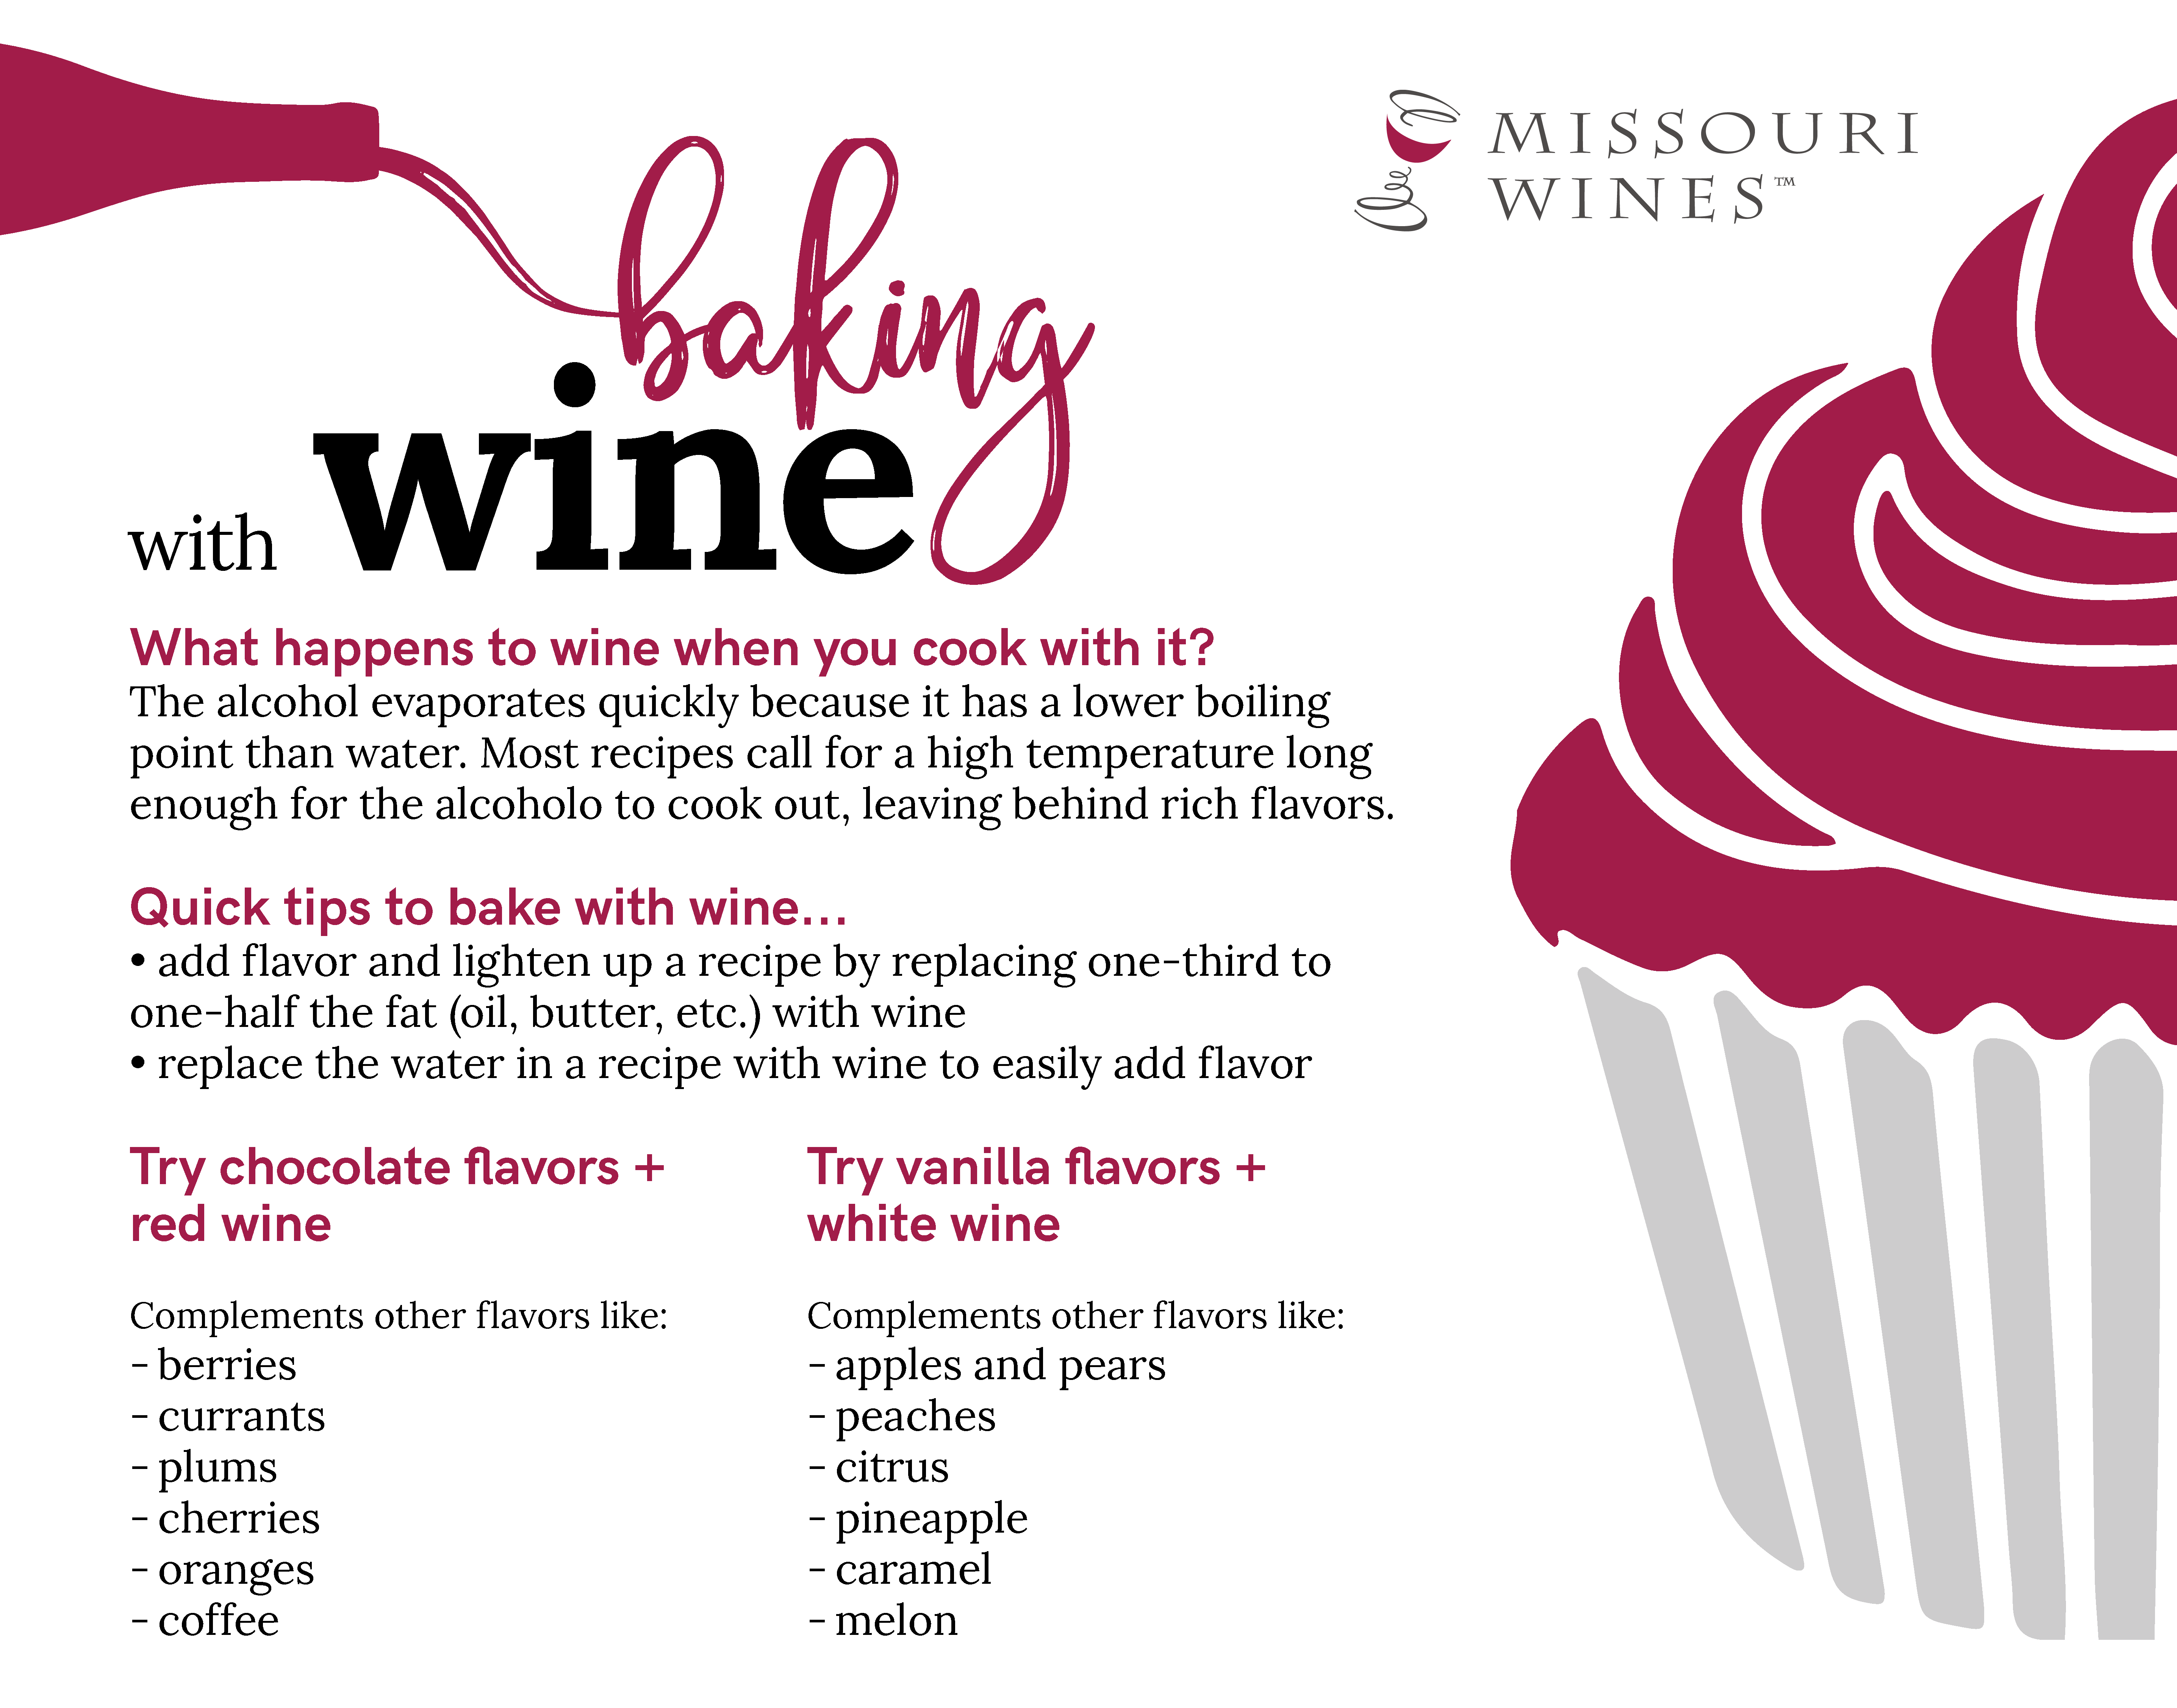 Baking with Wine